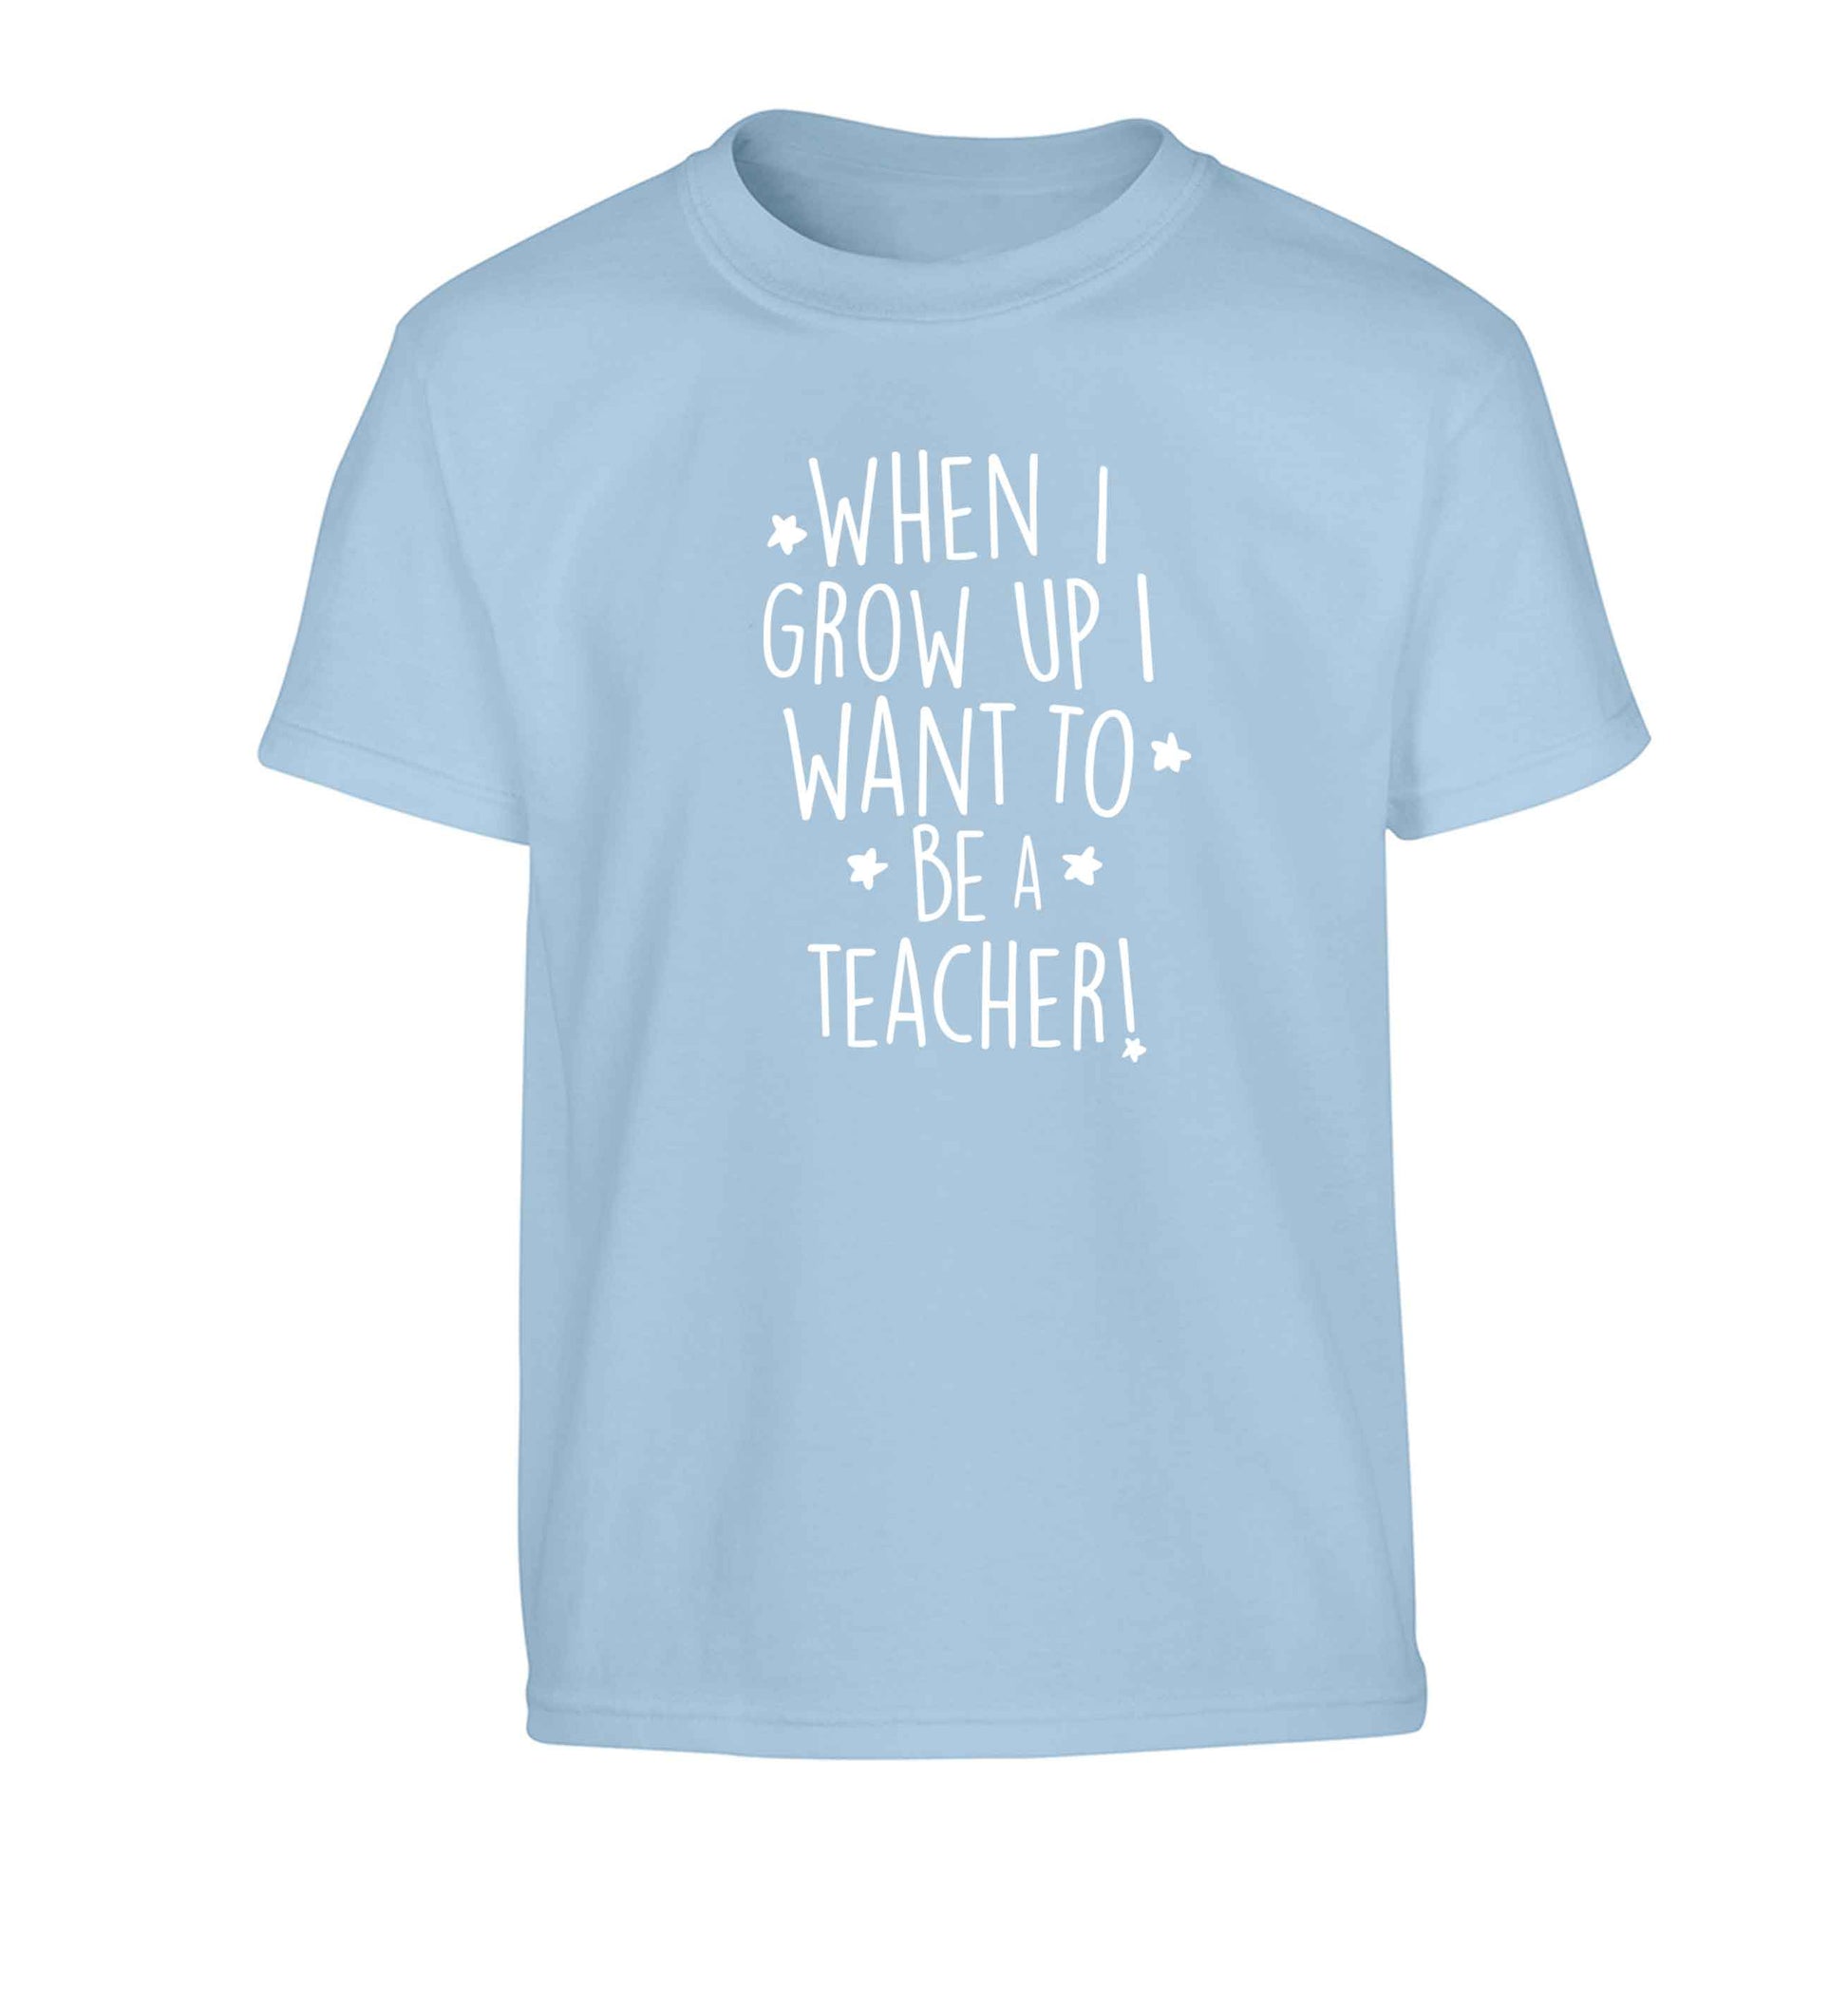 When I grow up I want to be a teacher Children's light blue Tshirt 12-13 Years